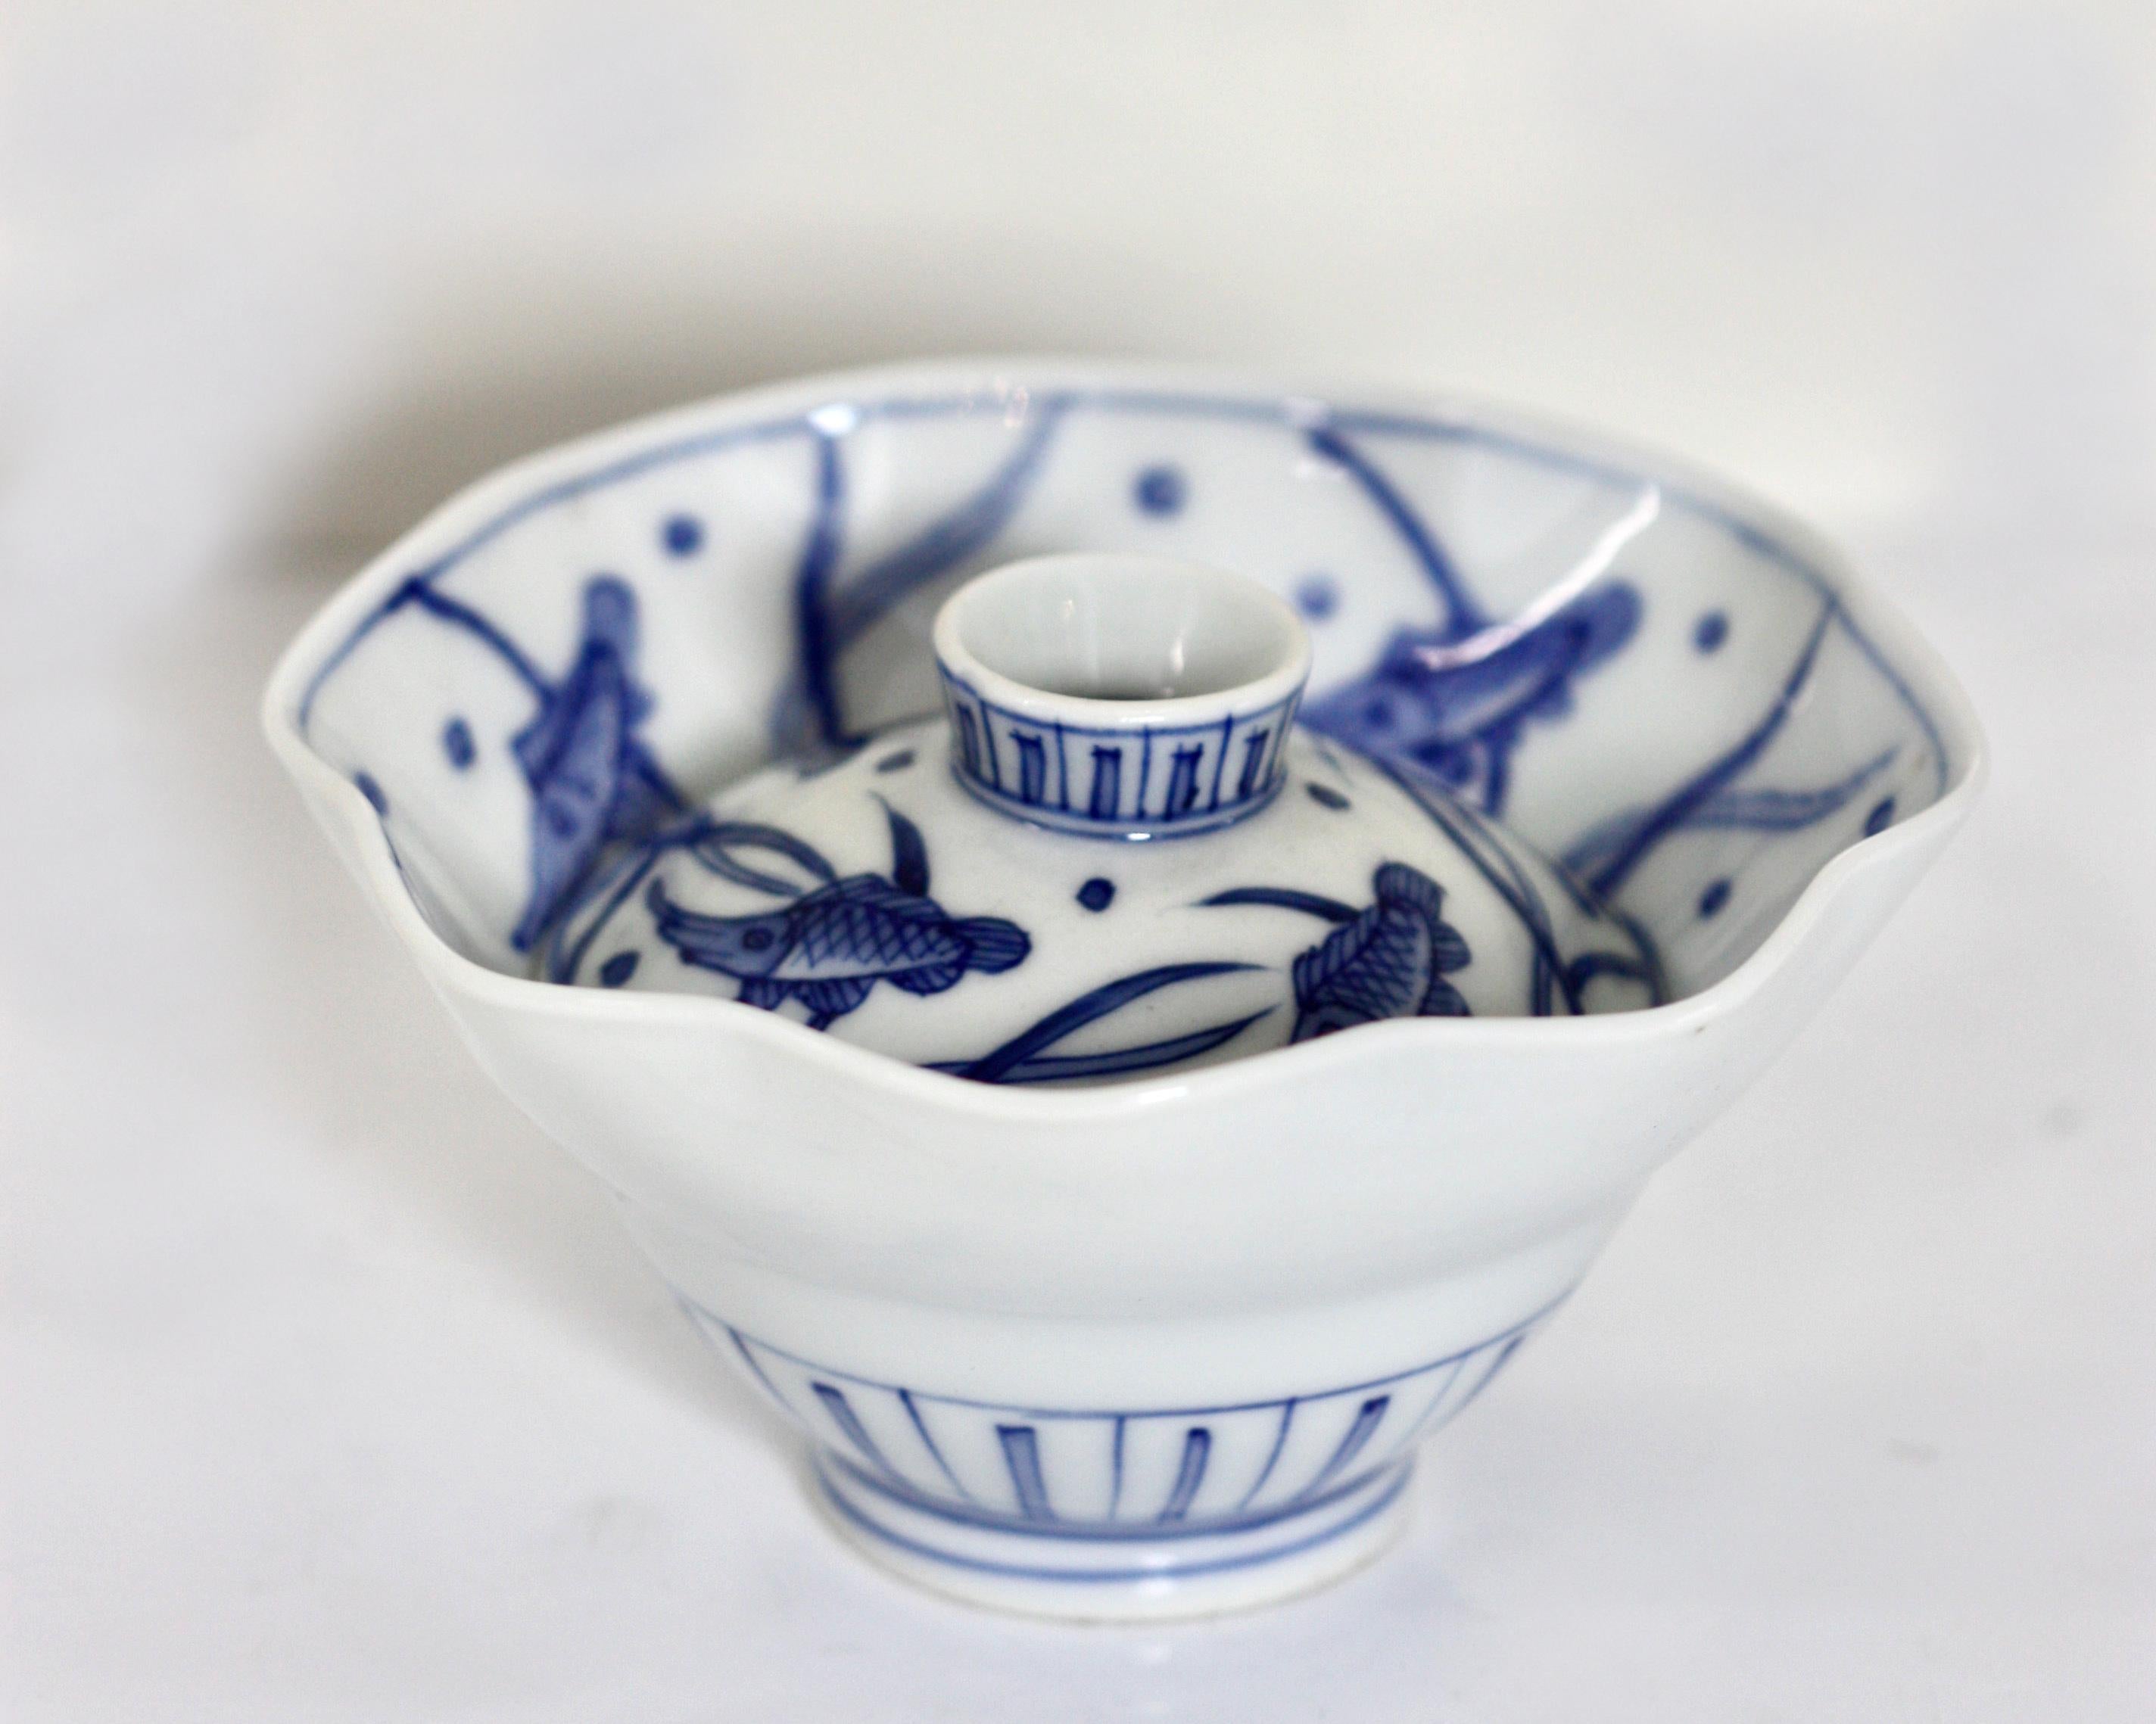 Two antique Japanese Shunga (erotica) works of art. 
One a shallow dish with explicit detail and evidence of the Kutani studio, 
Diameter 7.5 in. (19.05 cm.) 
The other a hidden shunga as a fluted covered bowl, the exterior in cobalt underglaze